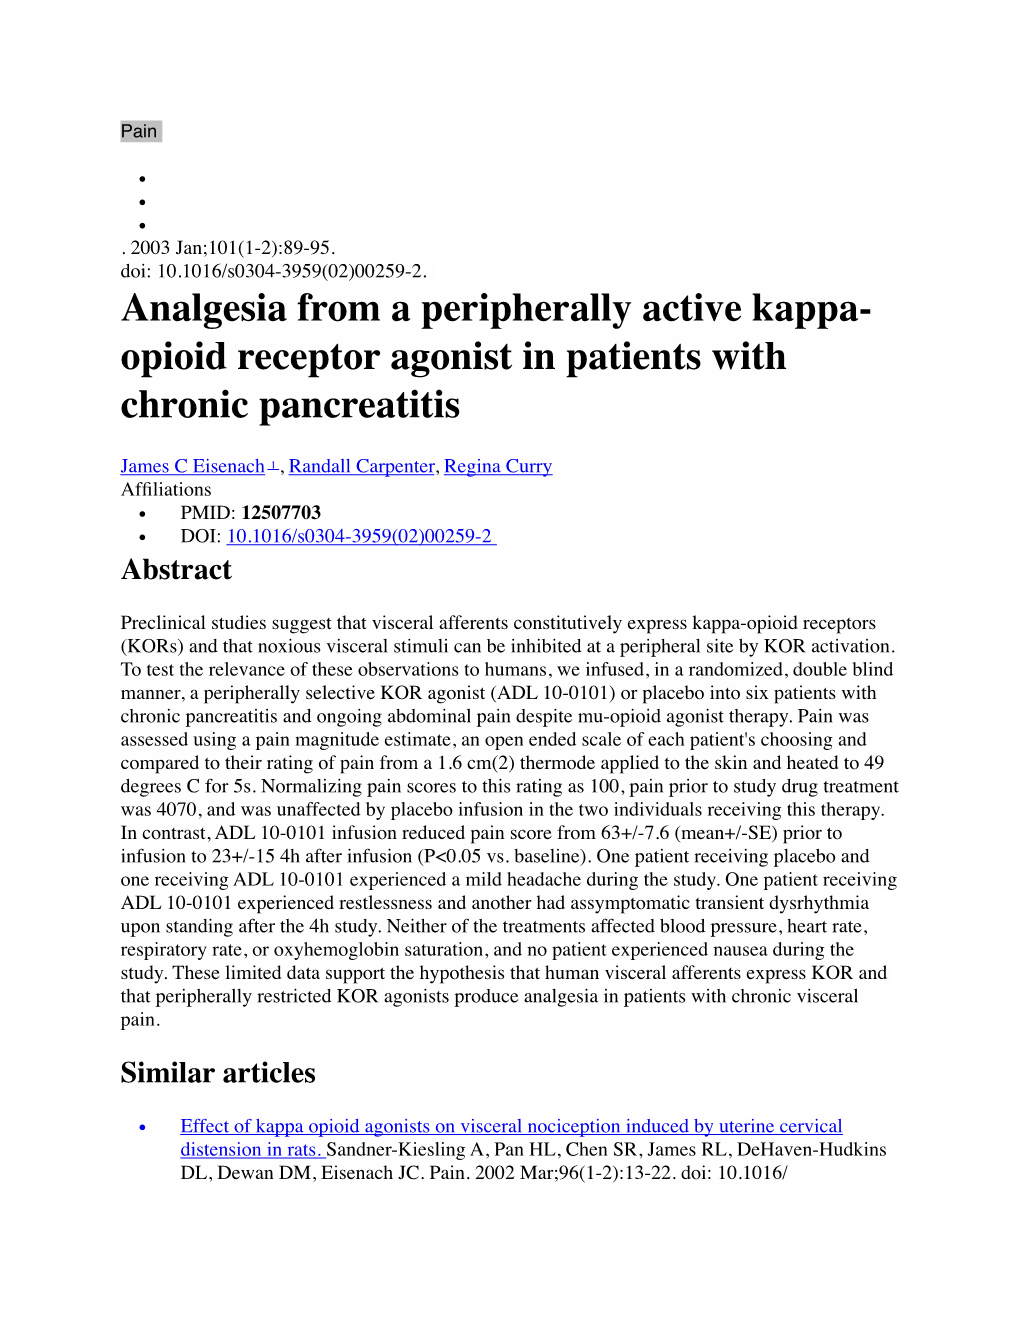 Analgesia from a Peripherally Active Kappa-Opioid